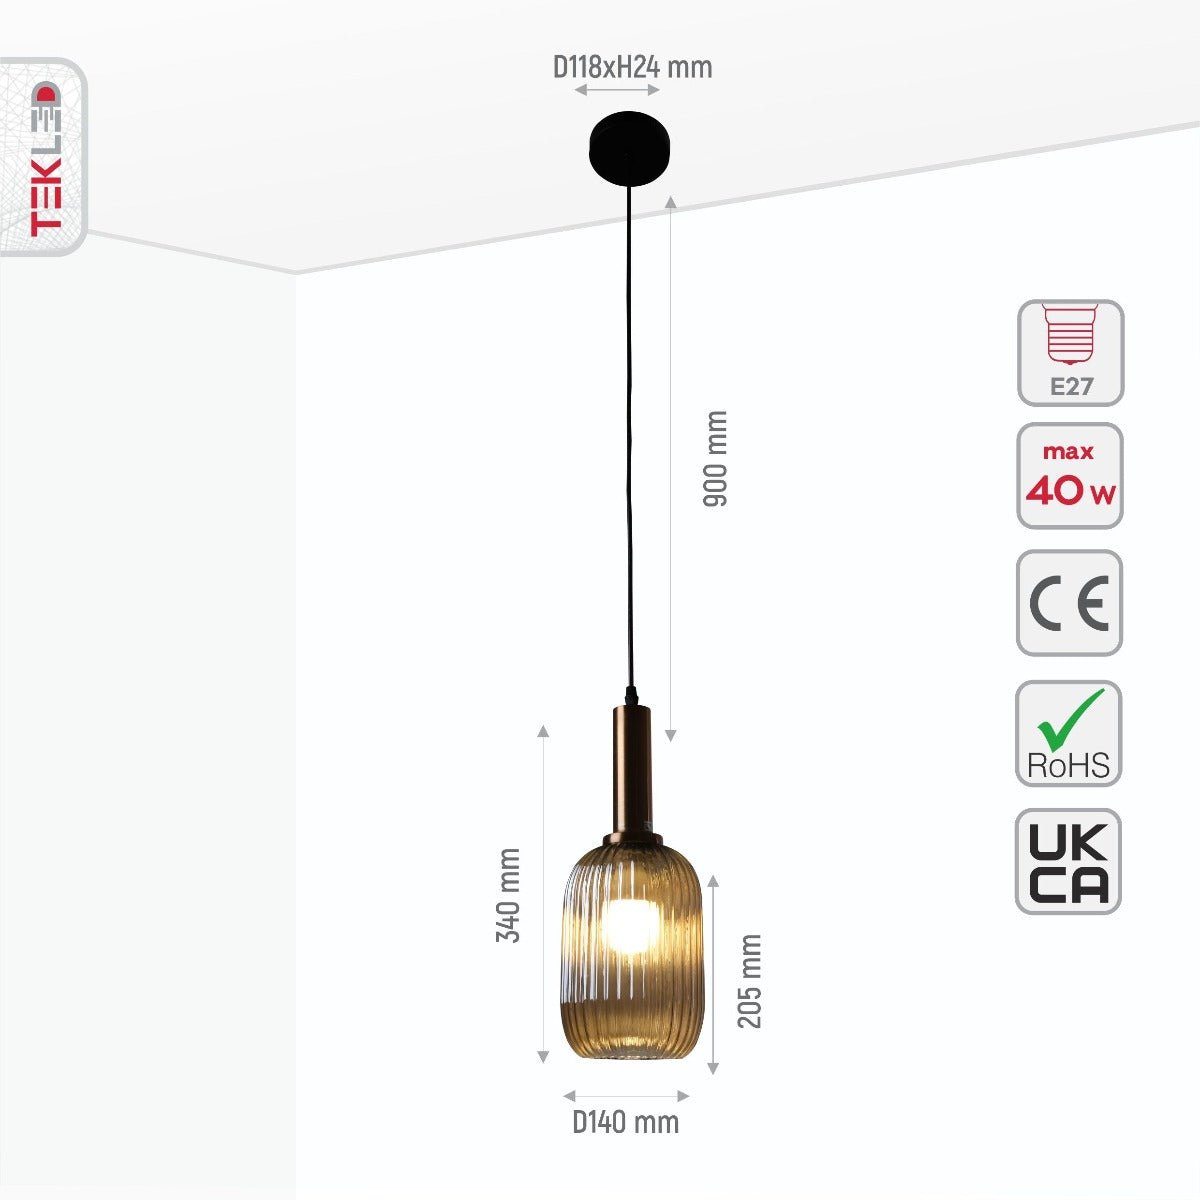 Size and specs of Amber Glass S Pendant Light with E27 Fitting | TEKLED 158-19600